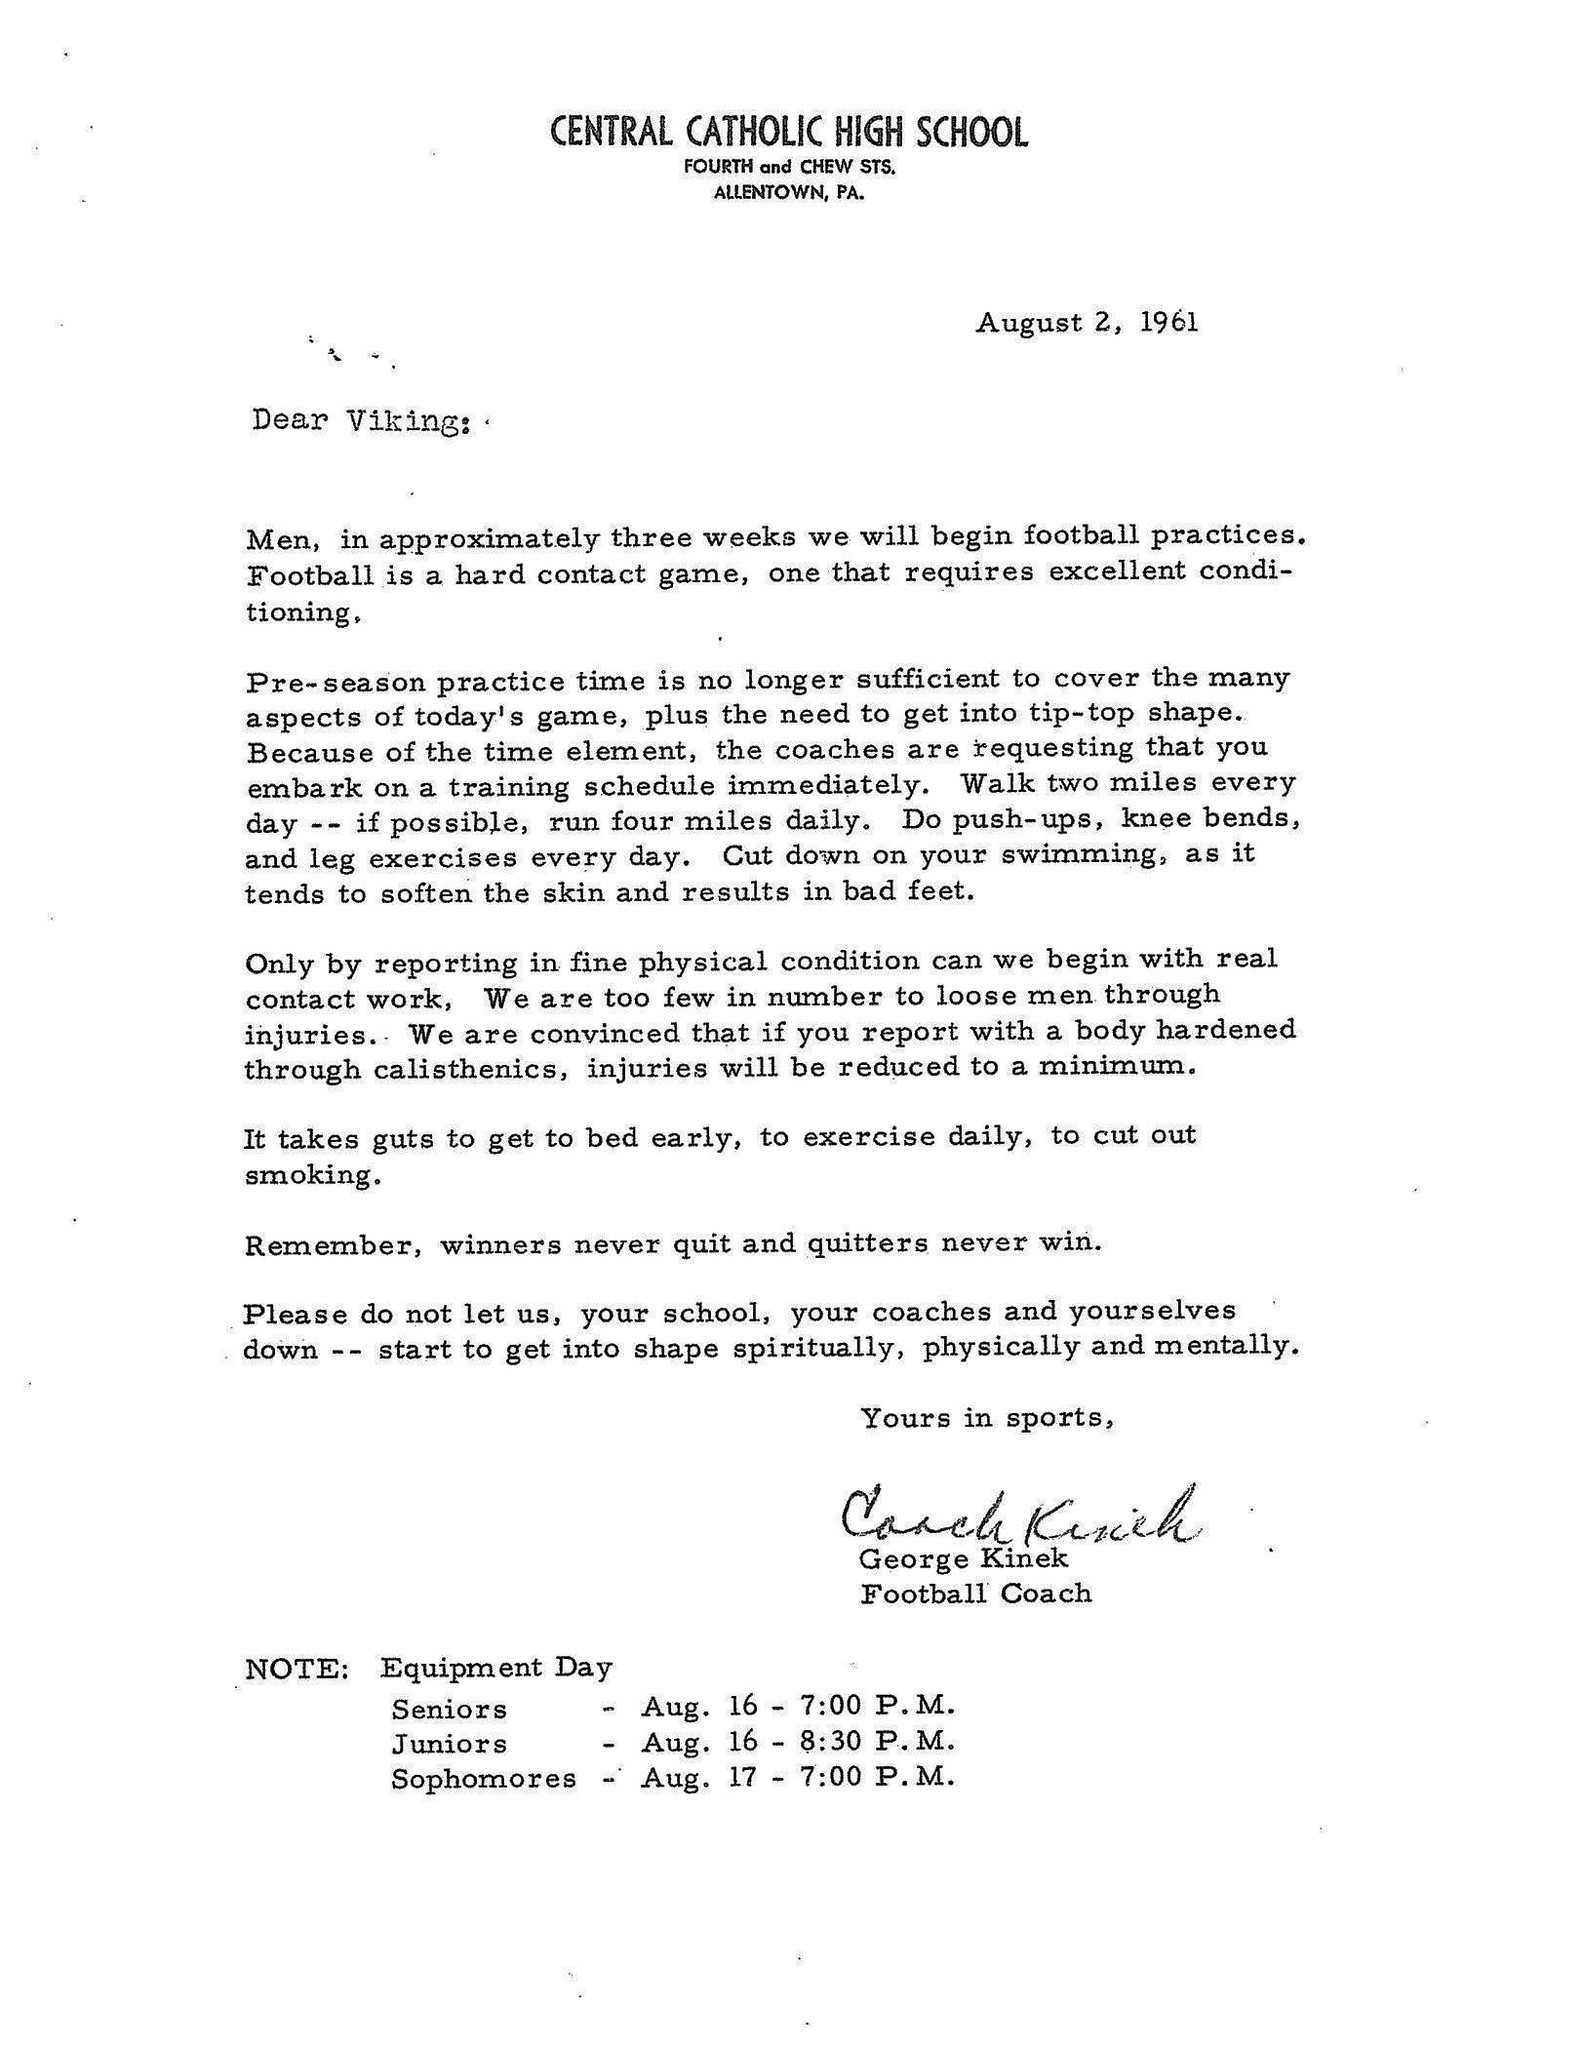 1961 preseason letter from CCHS coach George Kinek to his ...